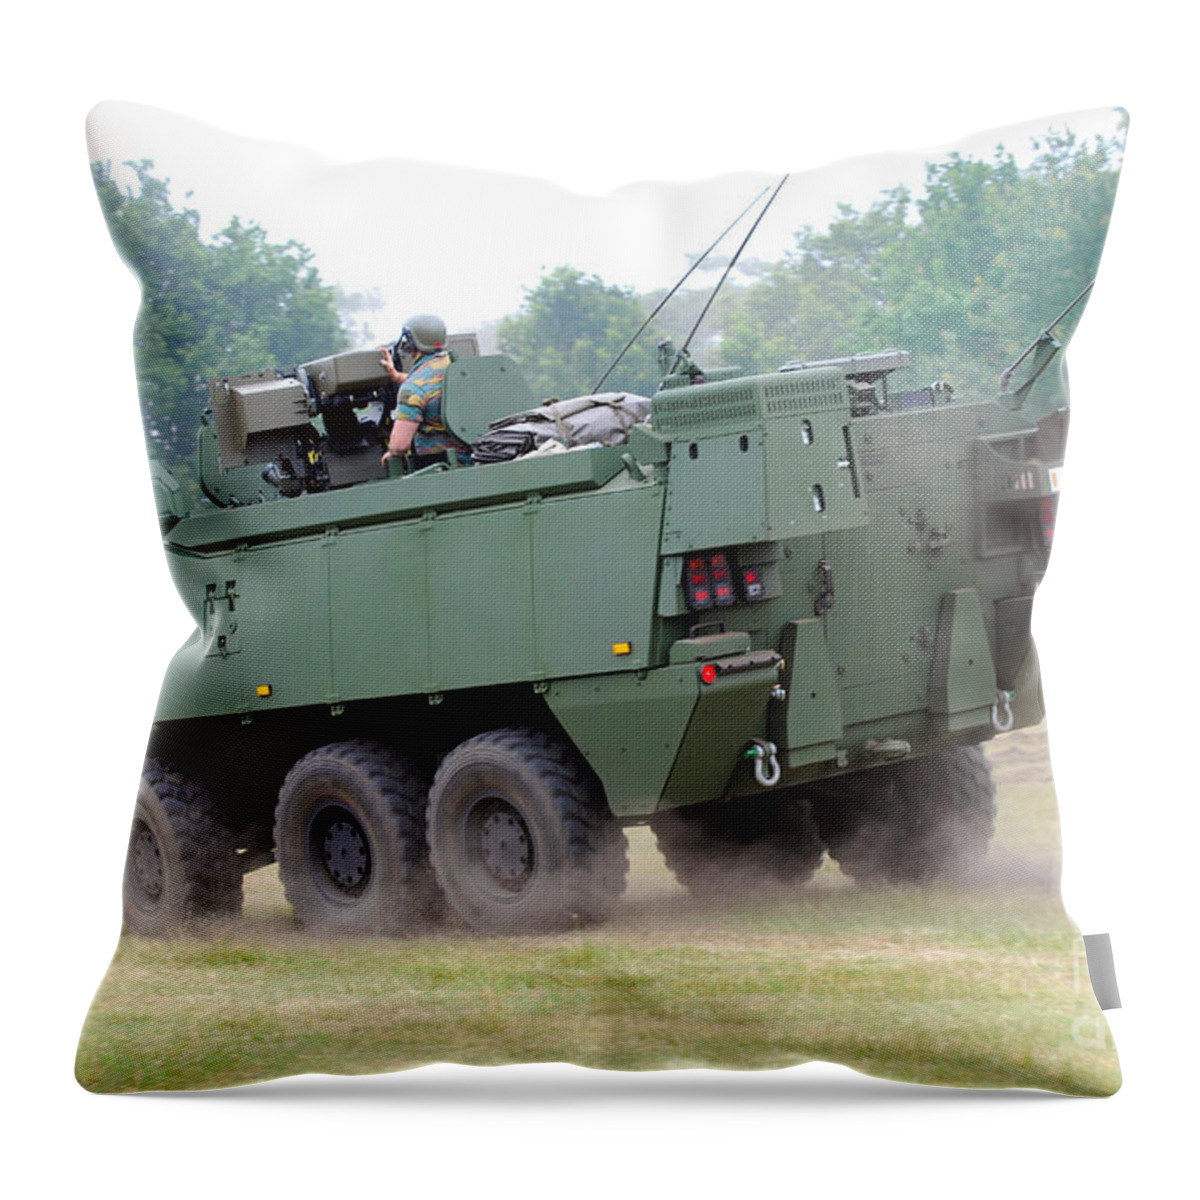 Military Throw Pillow featuring the photograph The Piranha IIic Of The Belgian Army by Luc De Jaeger